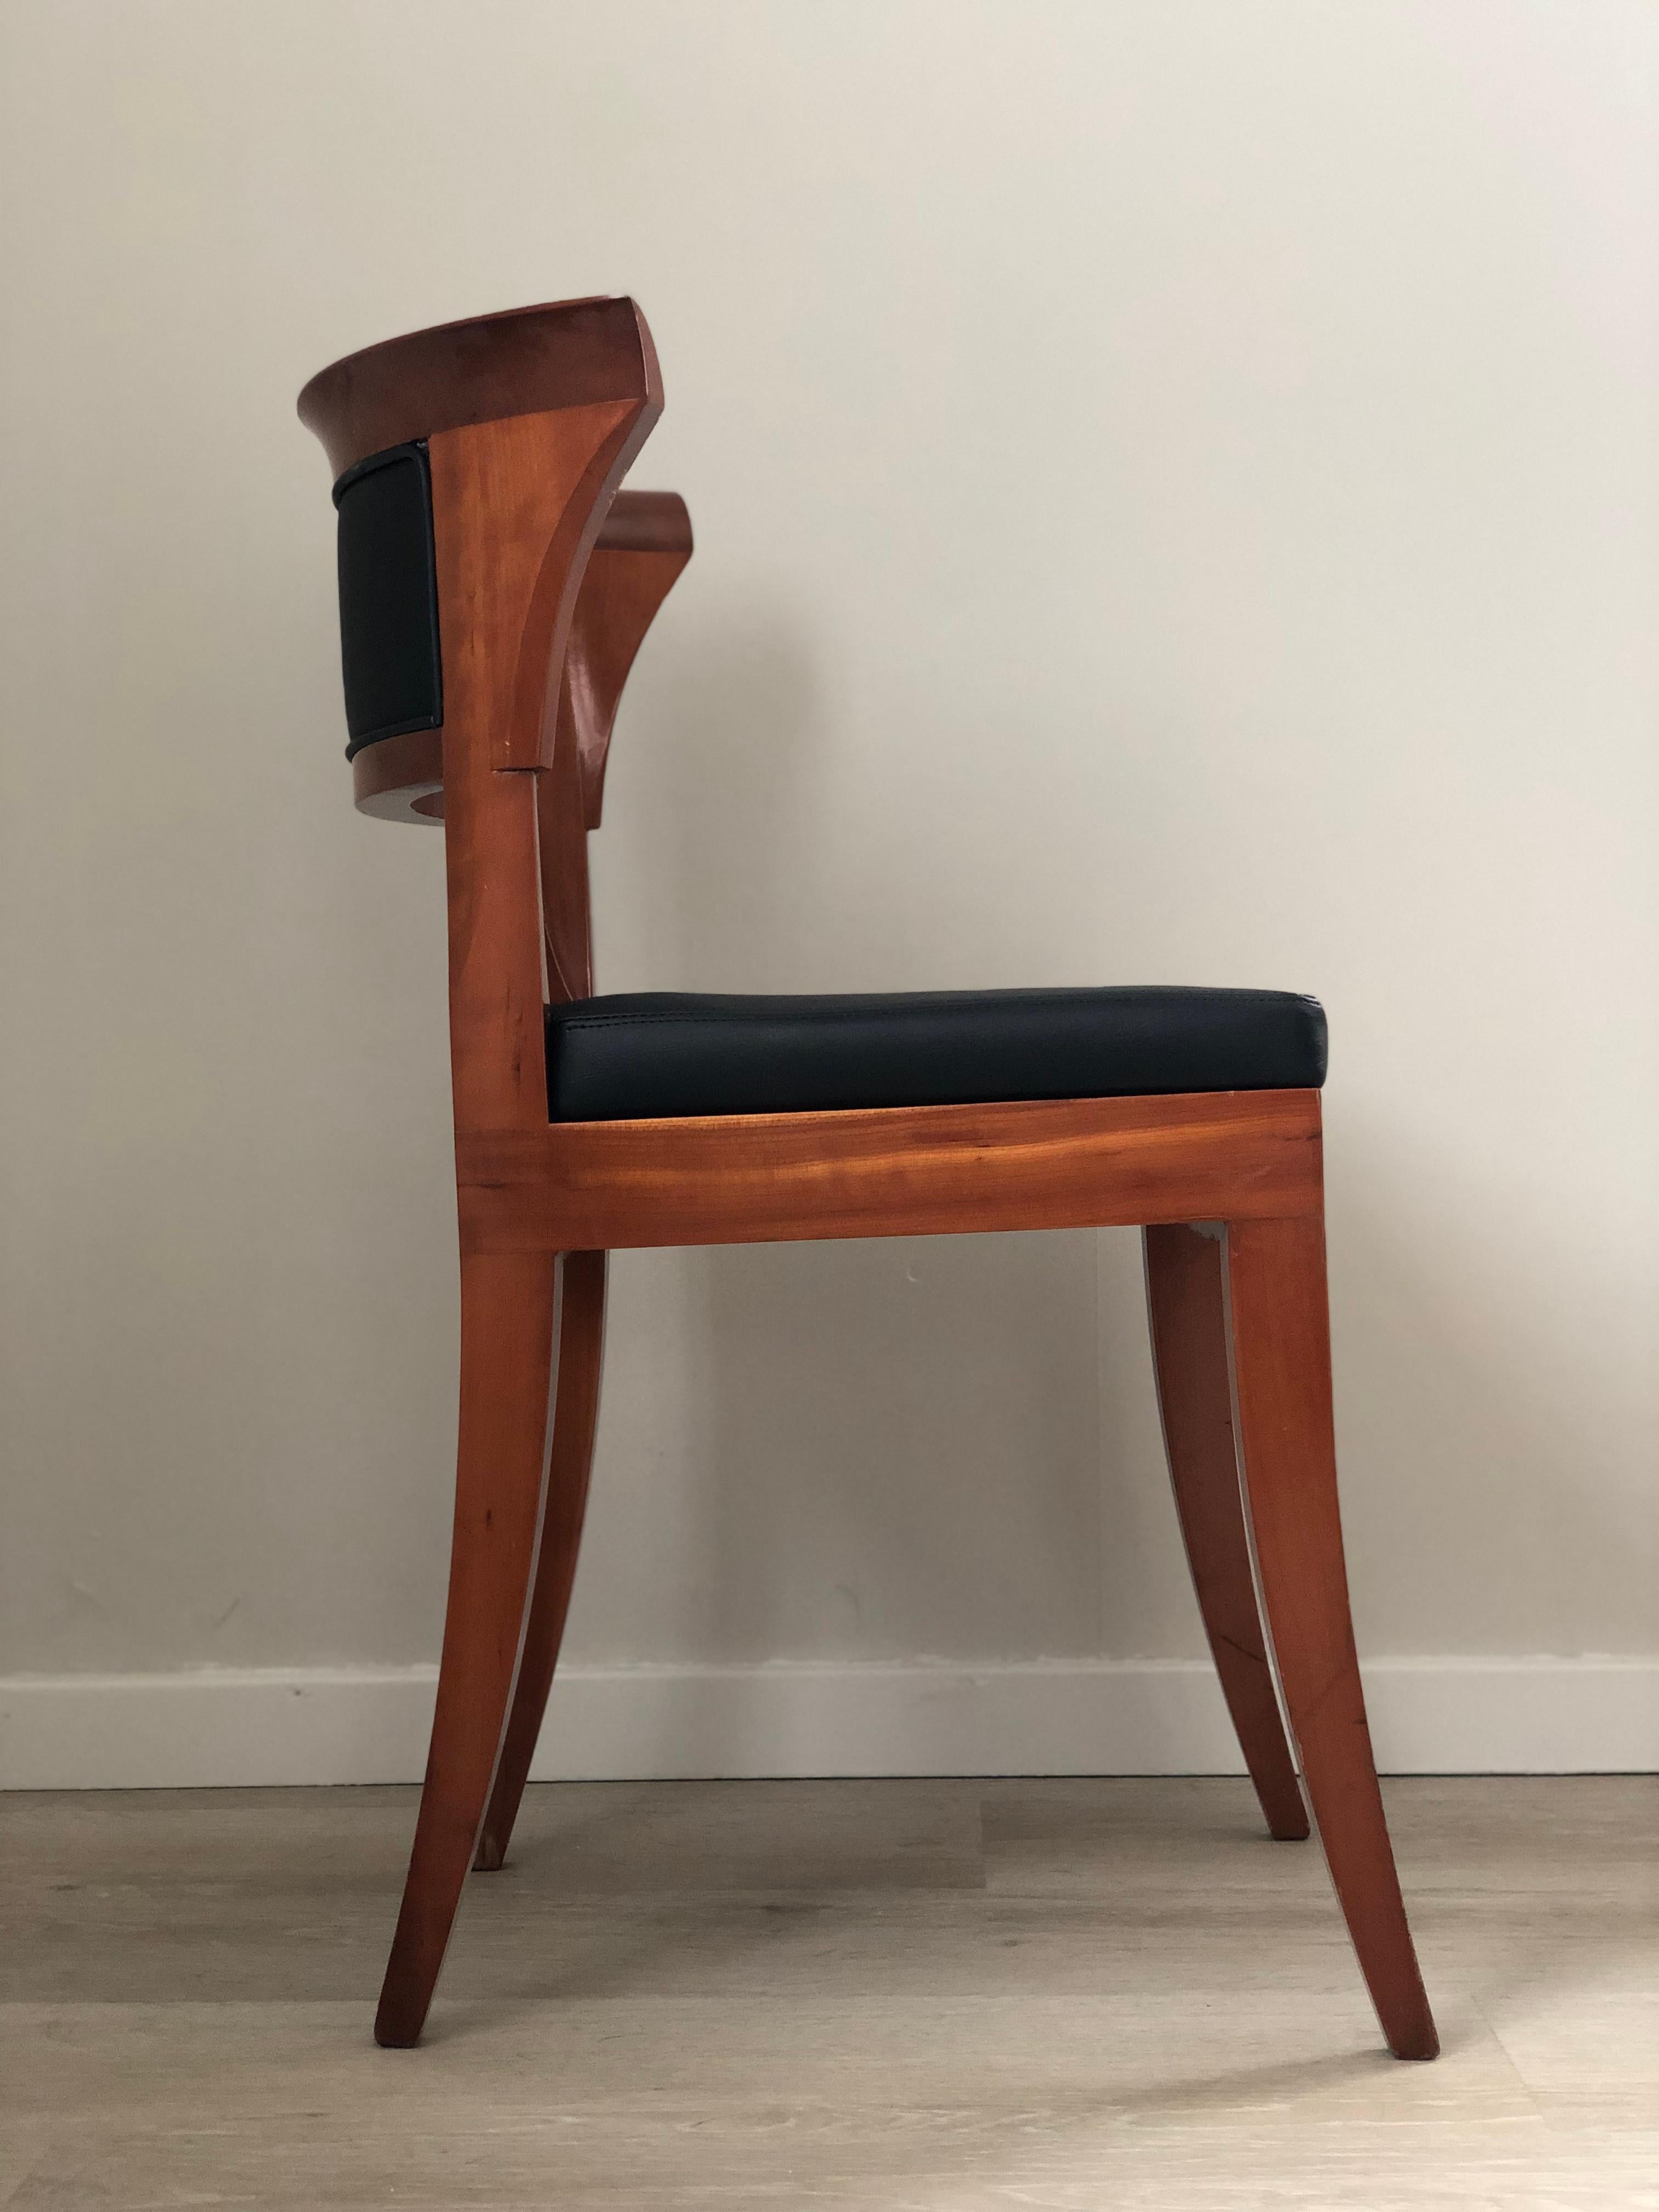 20th Century A Pair of 4 Giorgetti Cherry Wood Dining Chairs Model Sella Media by Leon Krier  For Sale